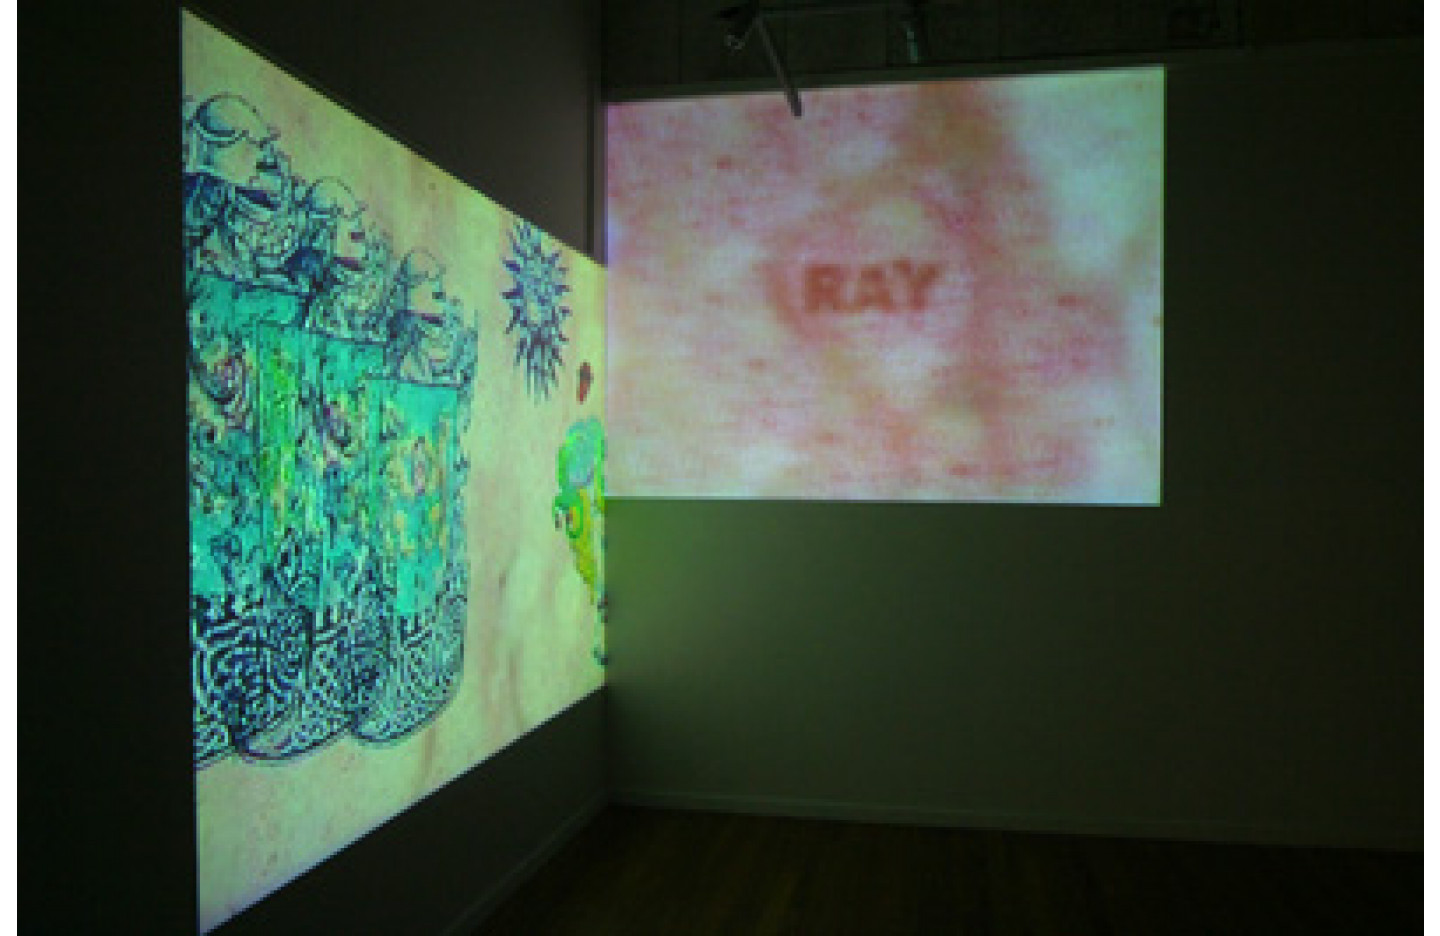 Skin Projection, Ramp Gallery (2003)